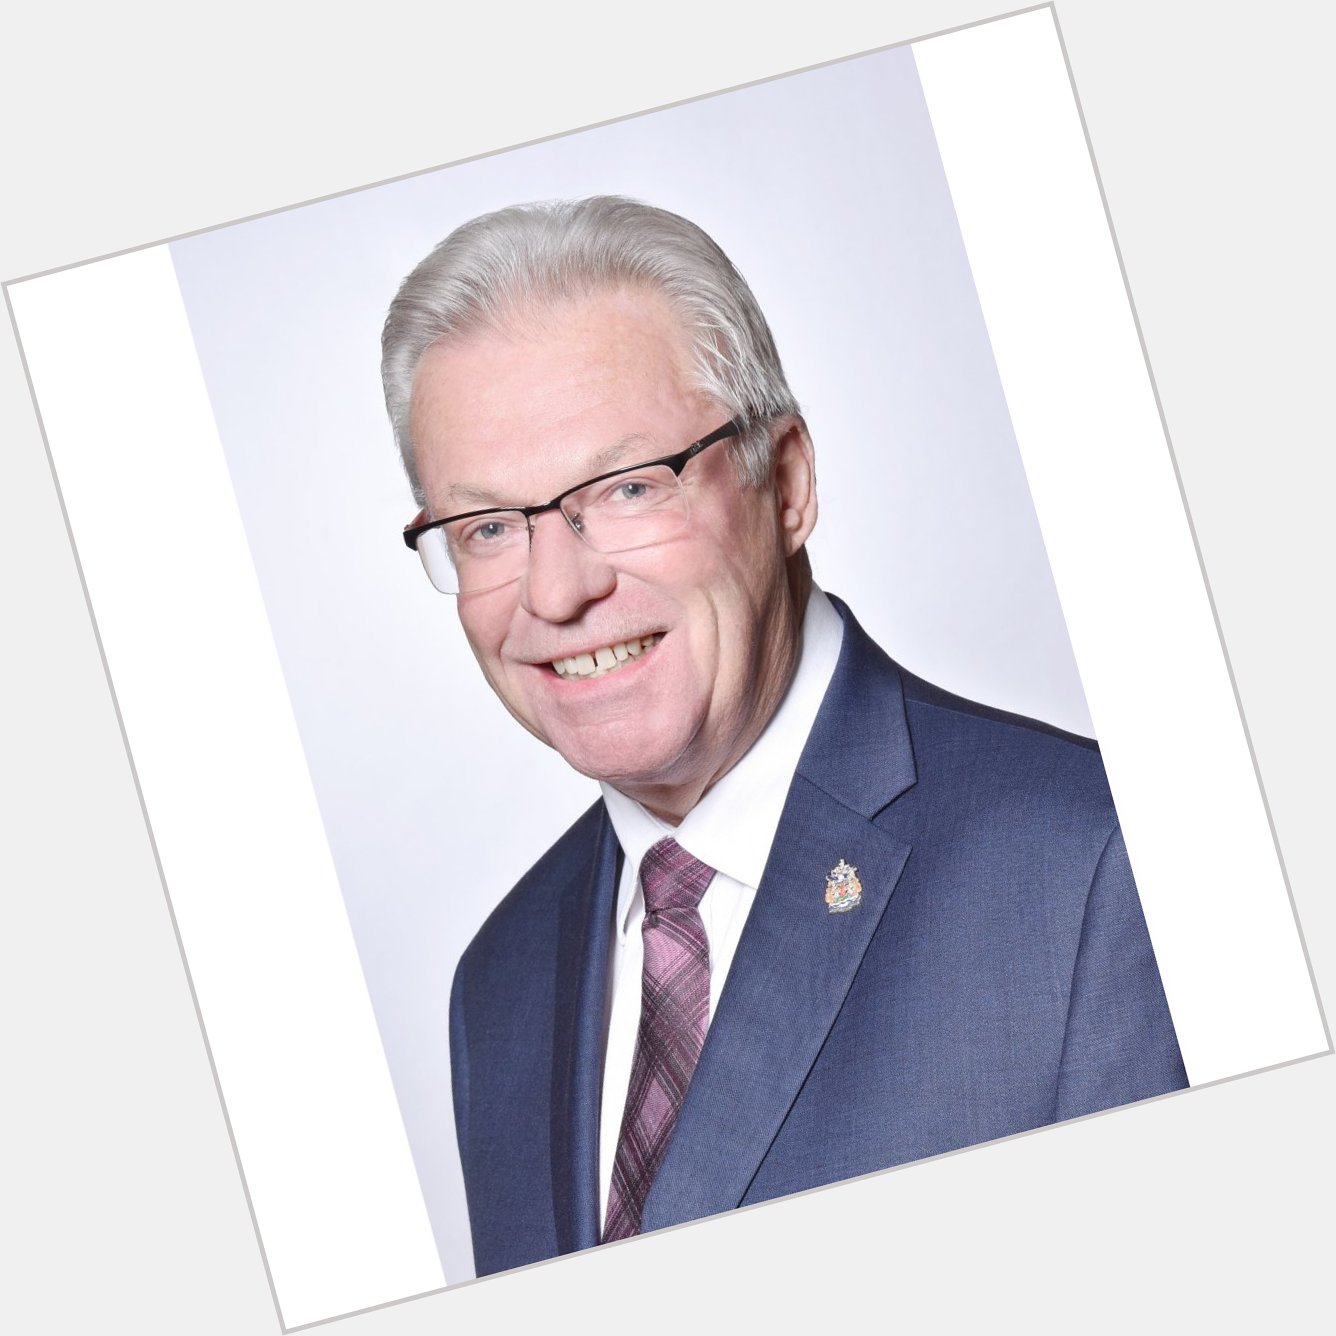 Wishing a happy birthday to Ward 10 Councillor Jim Morrison today! 